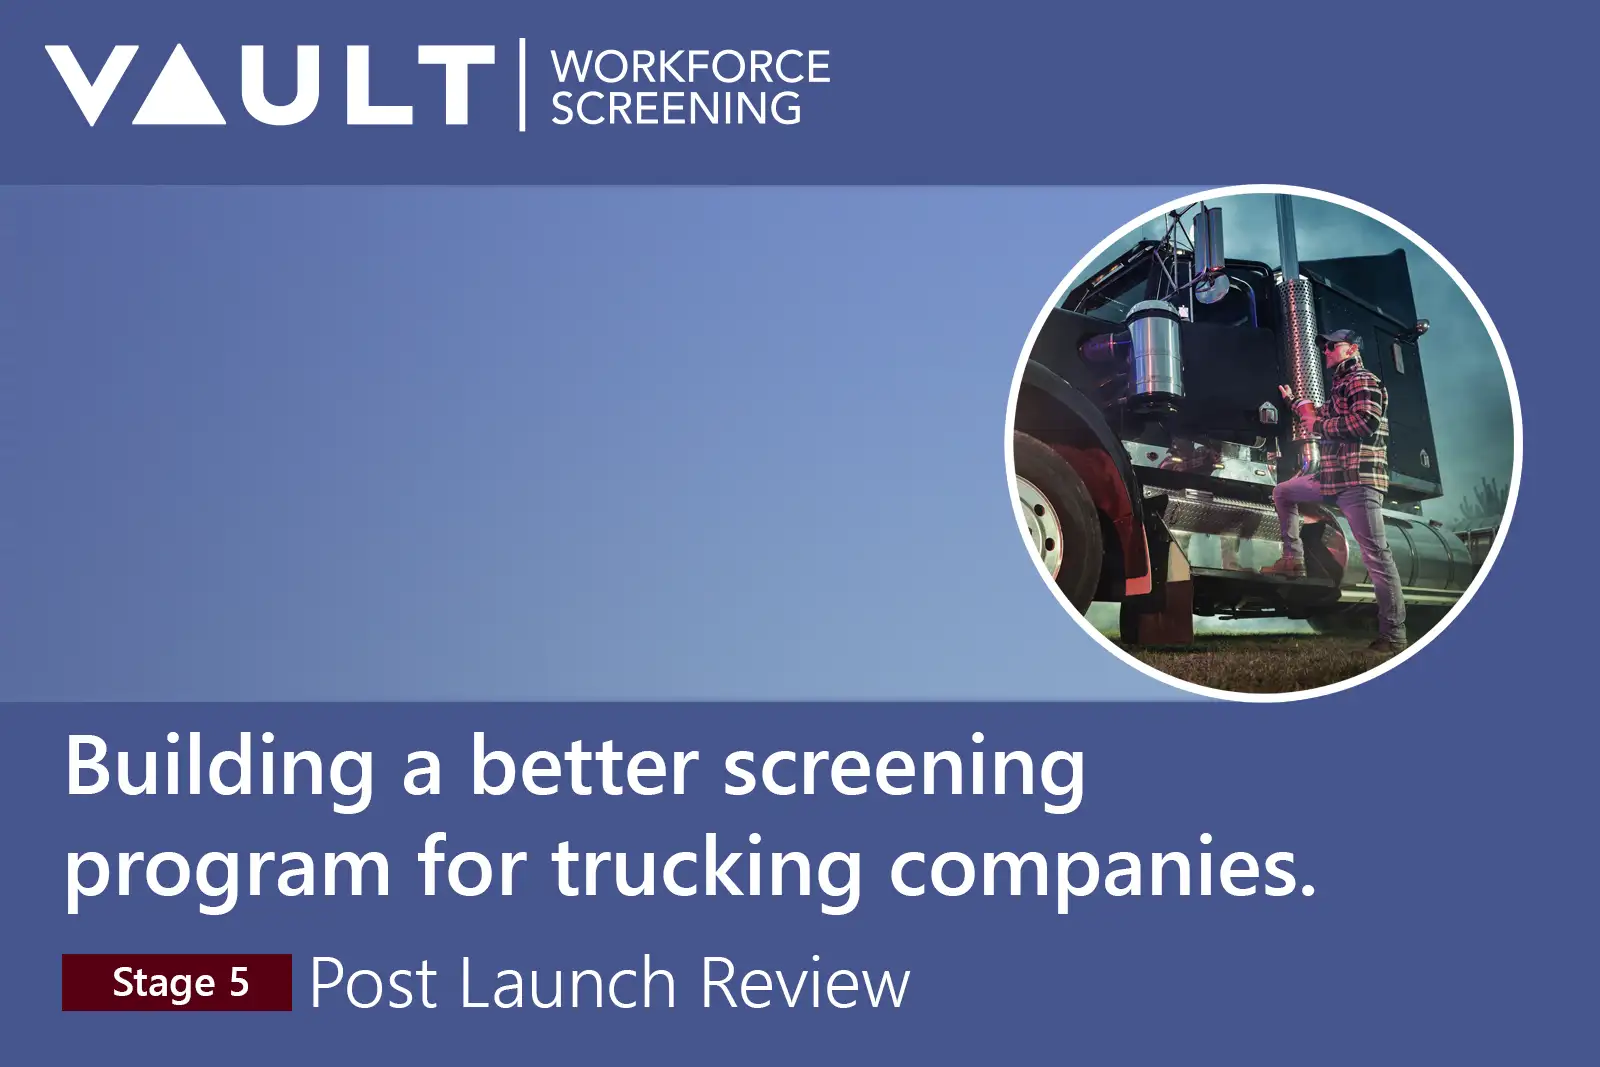 Trucking Companies: Stage 5 - Post-Launch Review of Screening Program